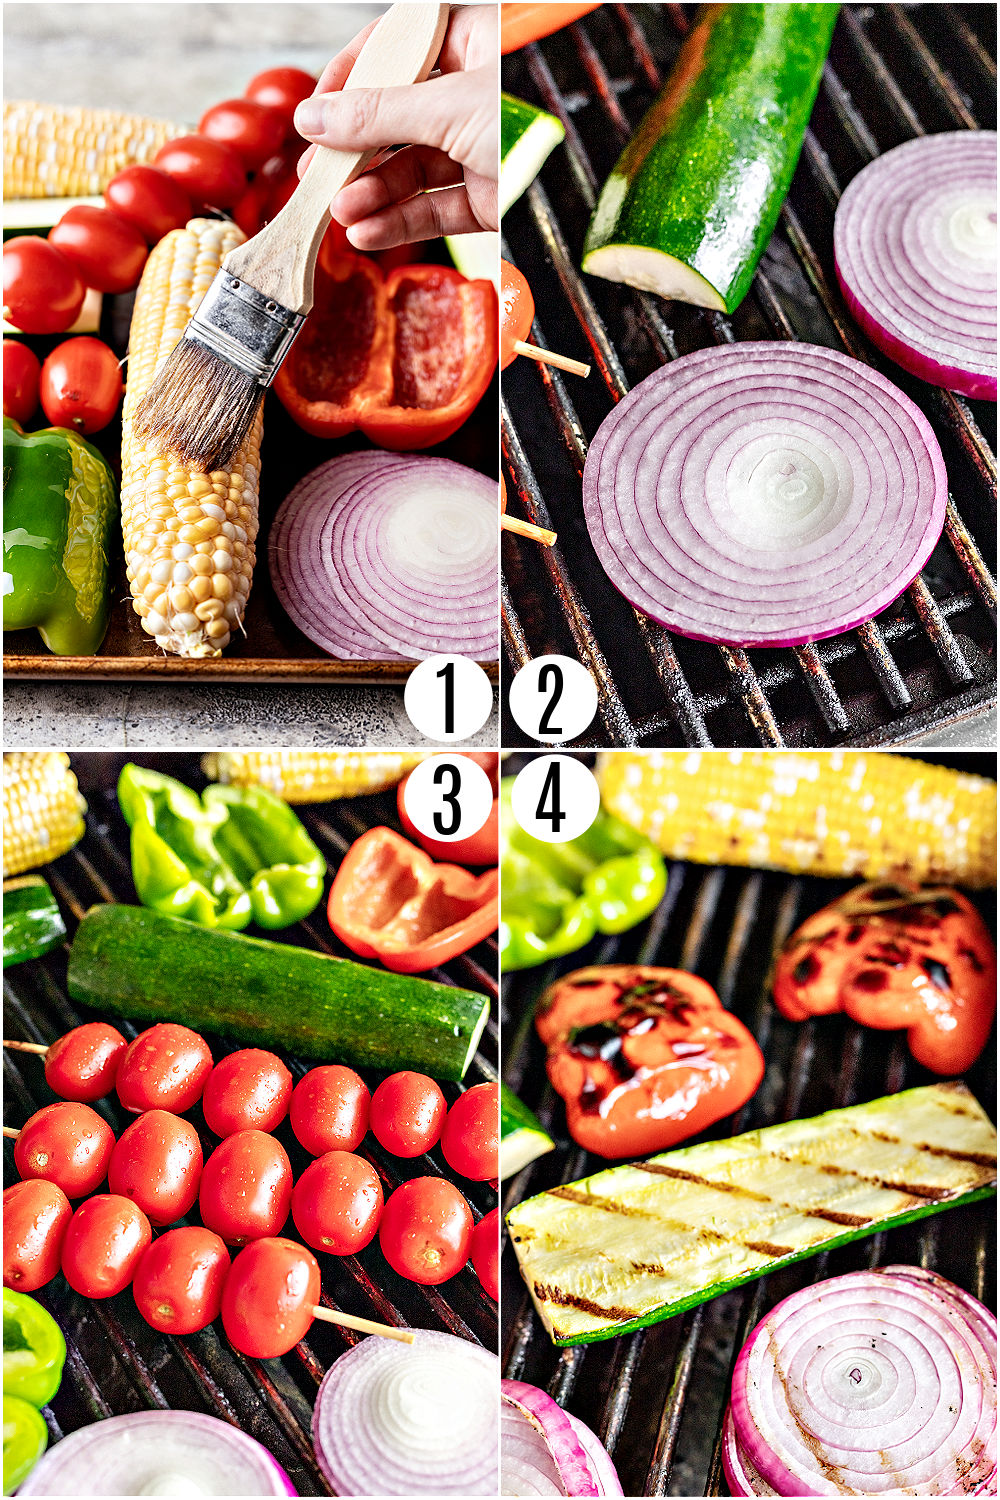 Step by step photos showing how to make grilled vegetables.